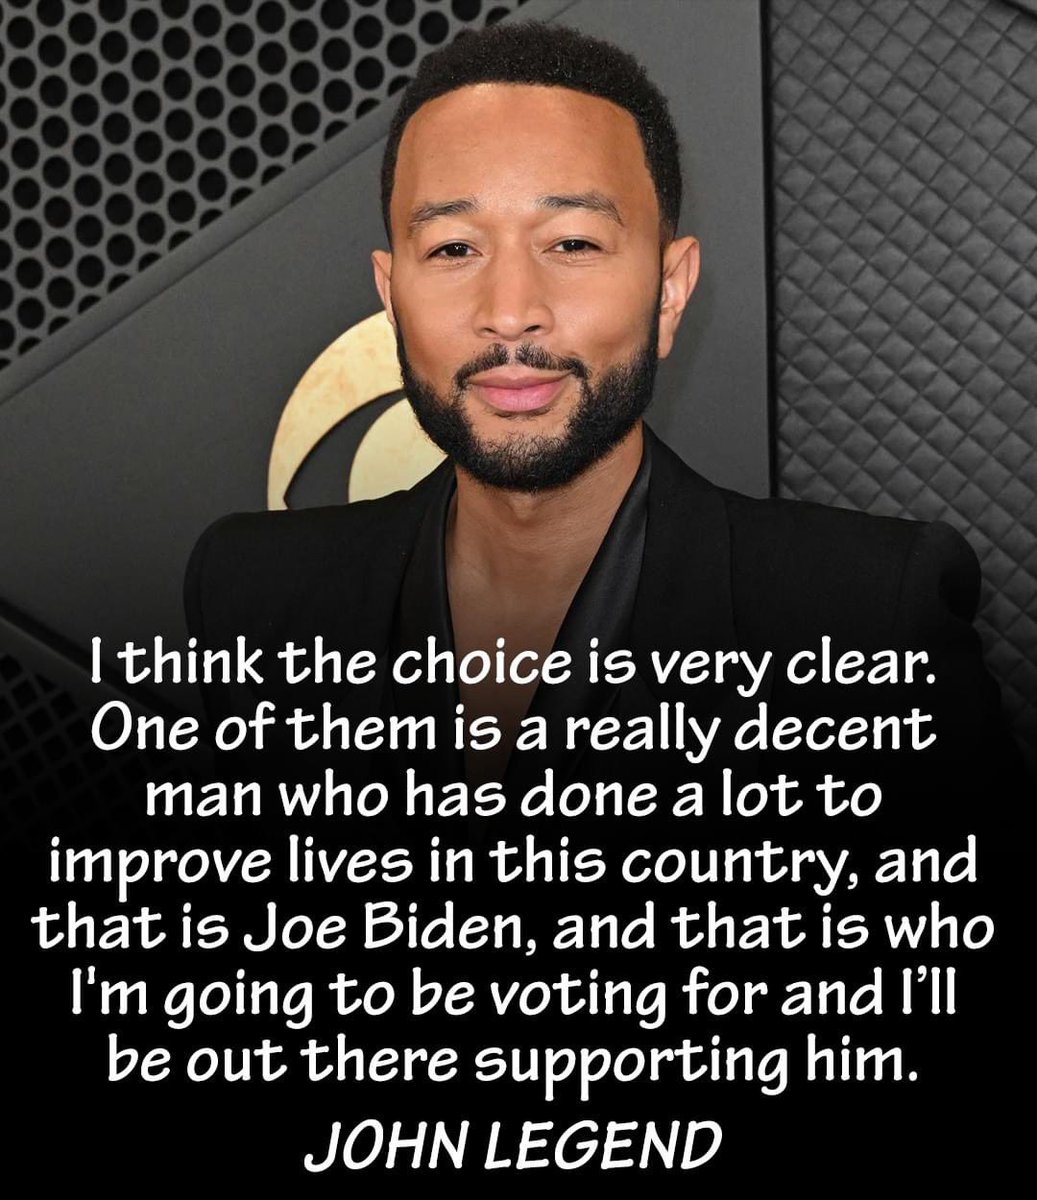 John Legend is a legend.
Don’t forget to subscribe! dworkinsubstack.com/subscribe